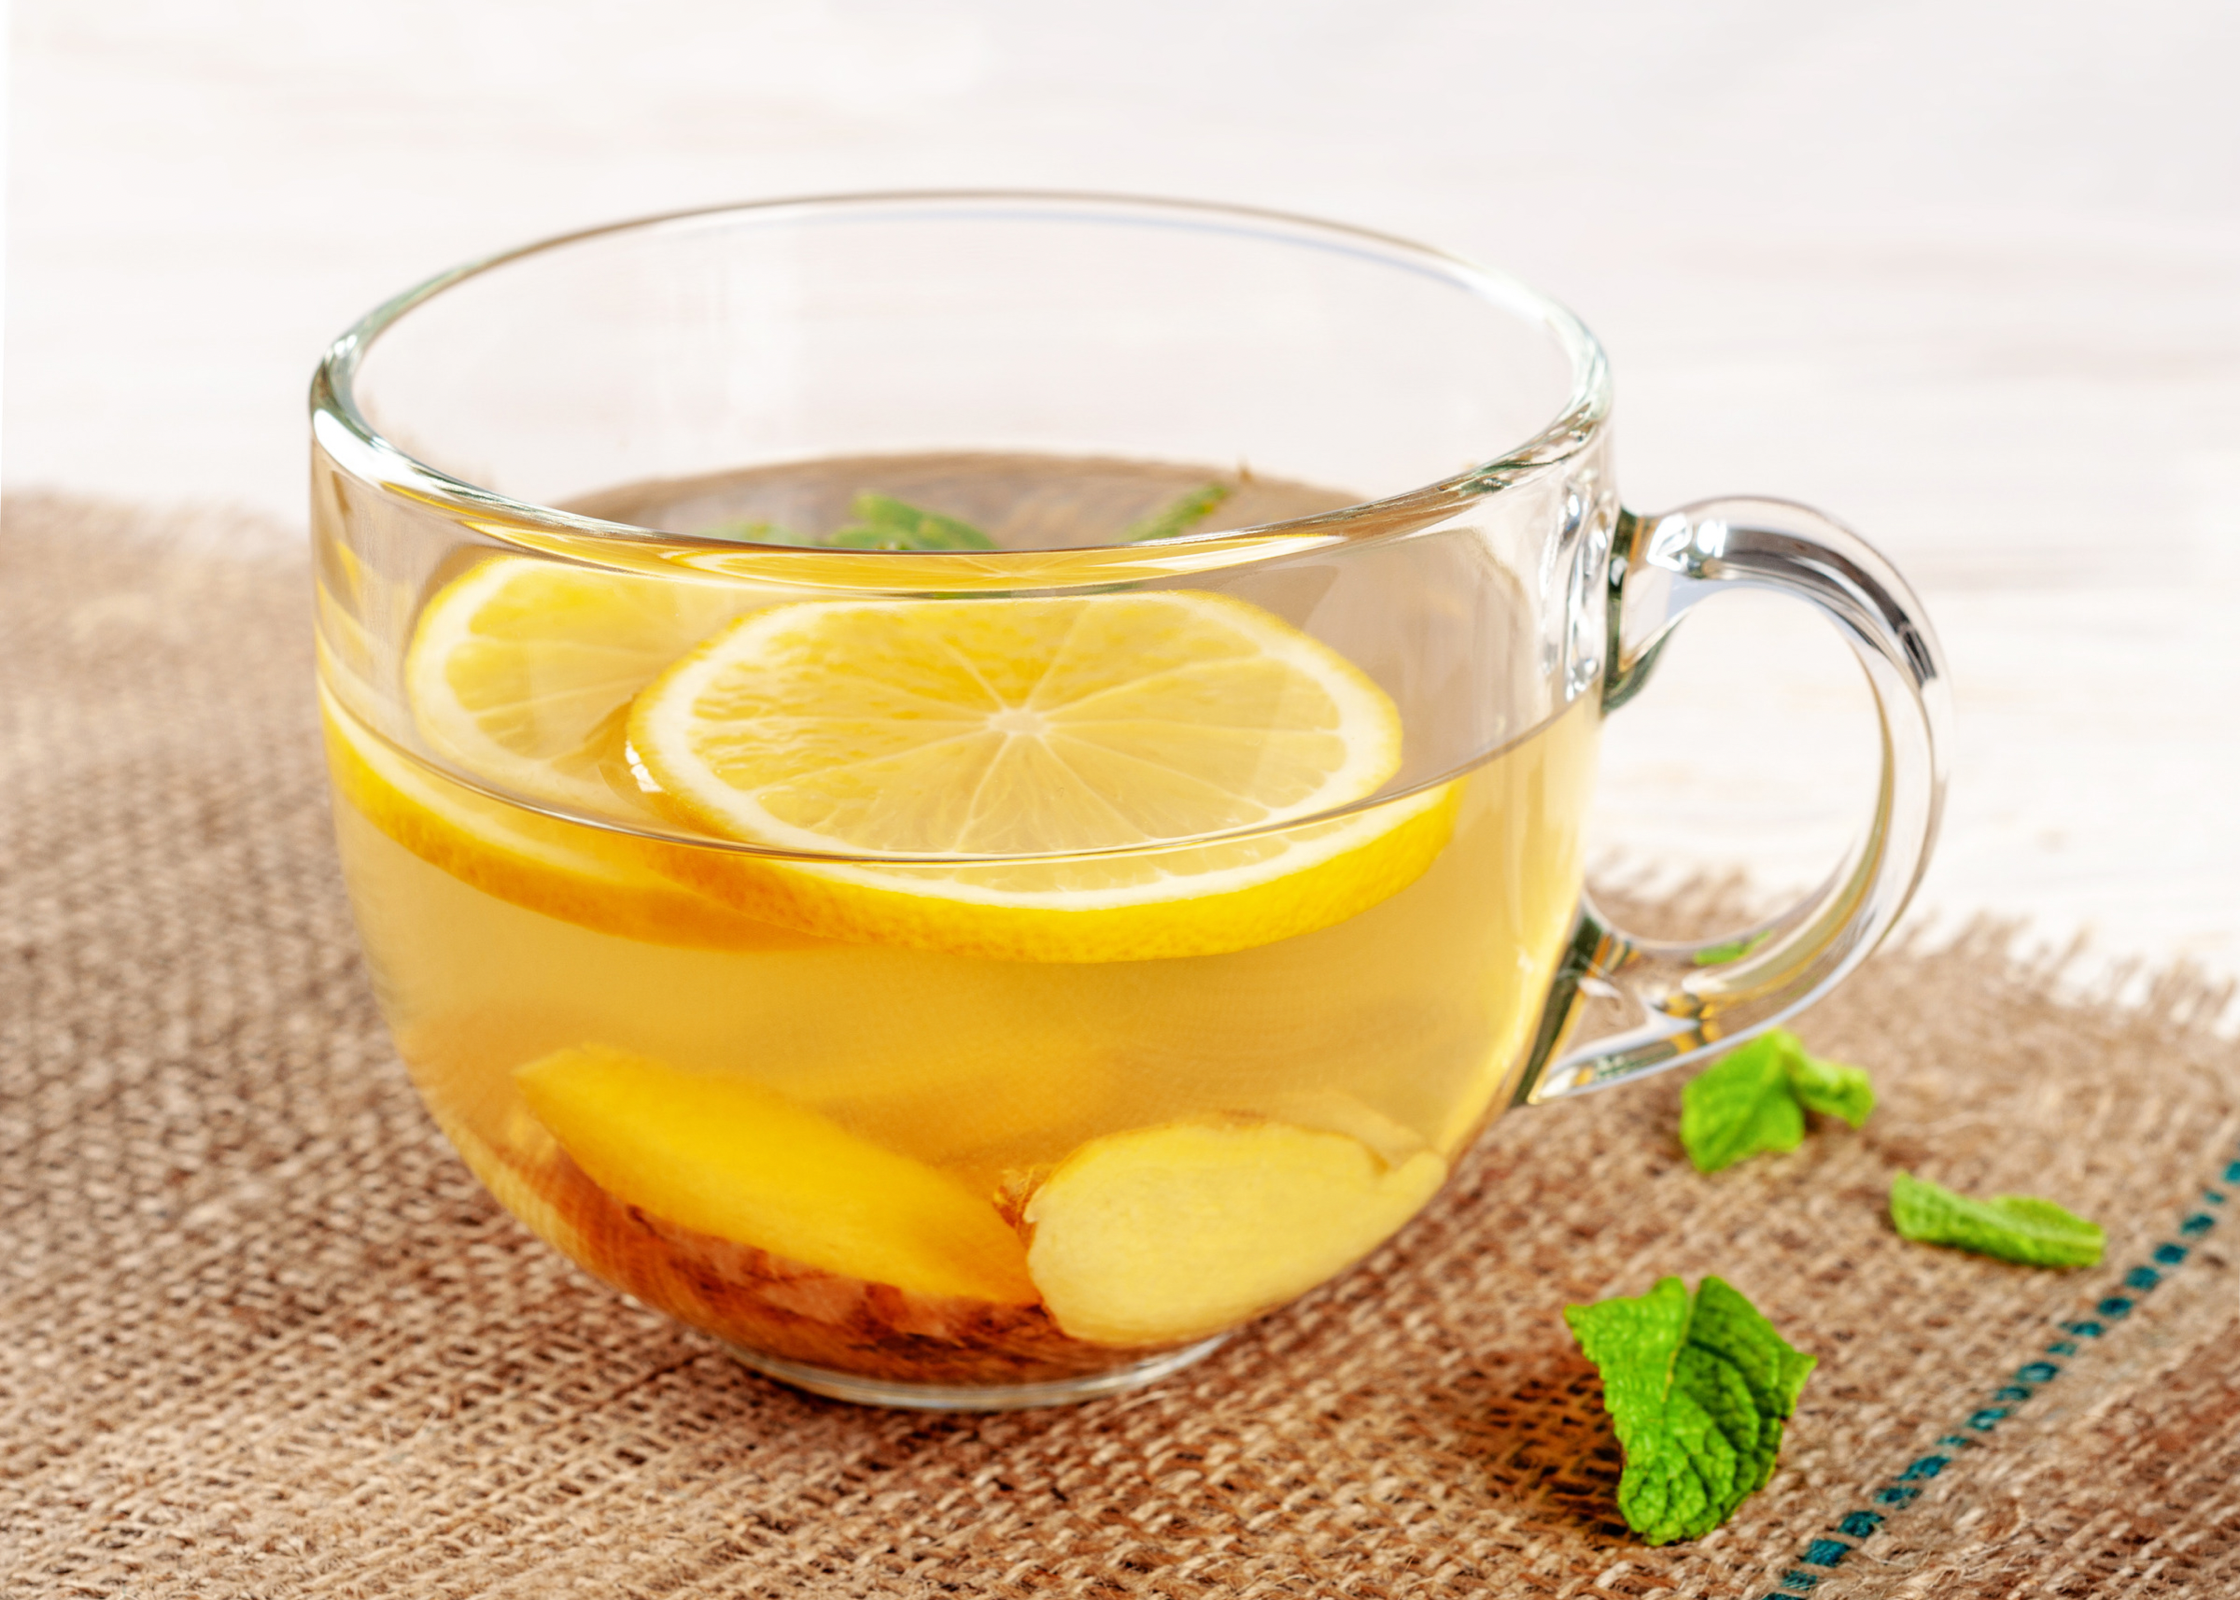 lemon water in the morning for clearing skin. Healthy skin drinks. Drinks for glowing skin. glowing skin drink. drinks that clear skin. morning drink for glowing skin. juice for skin glow. best morning drink. glowing skin juice